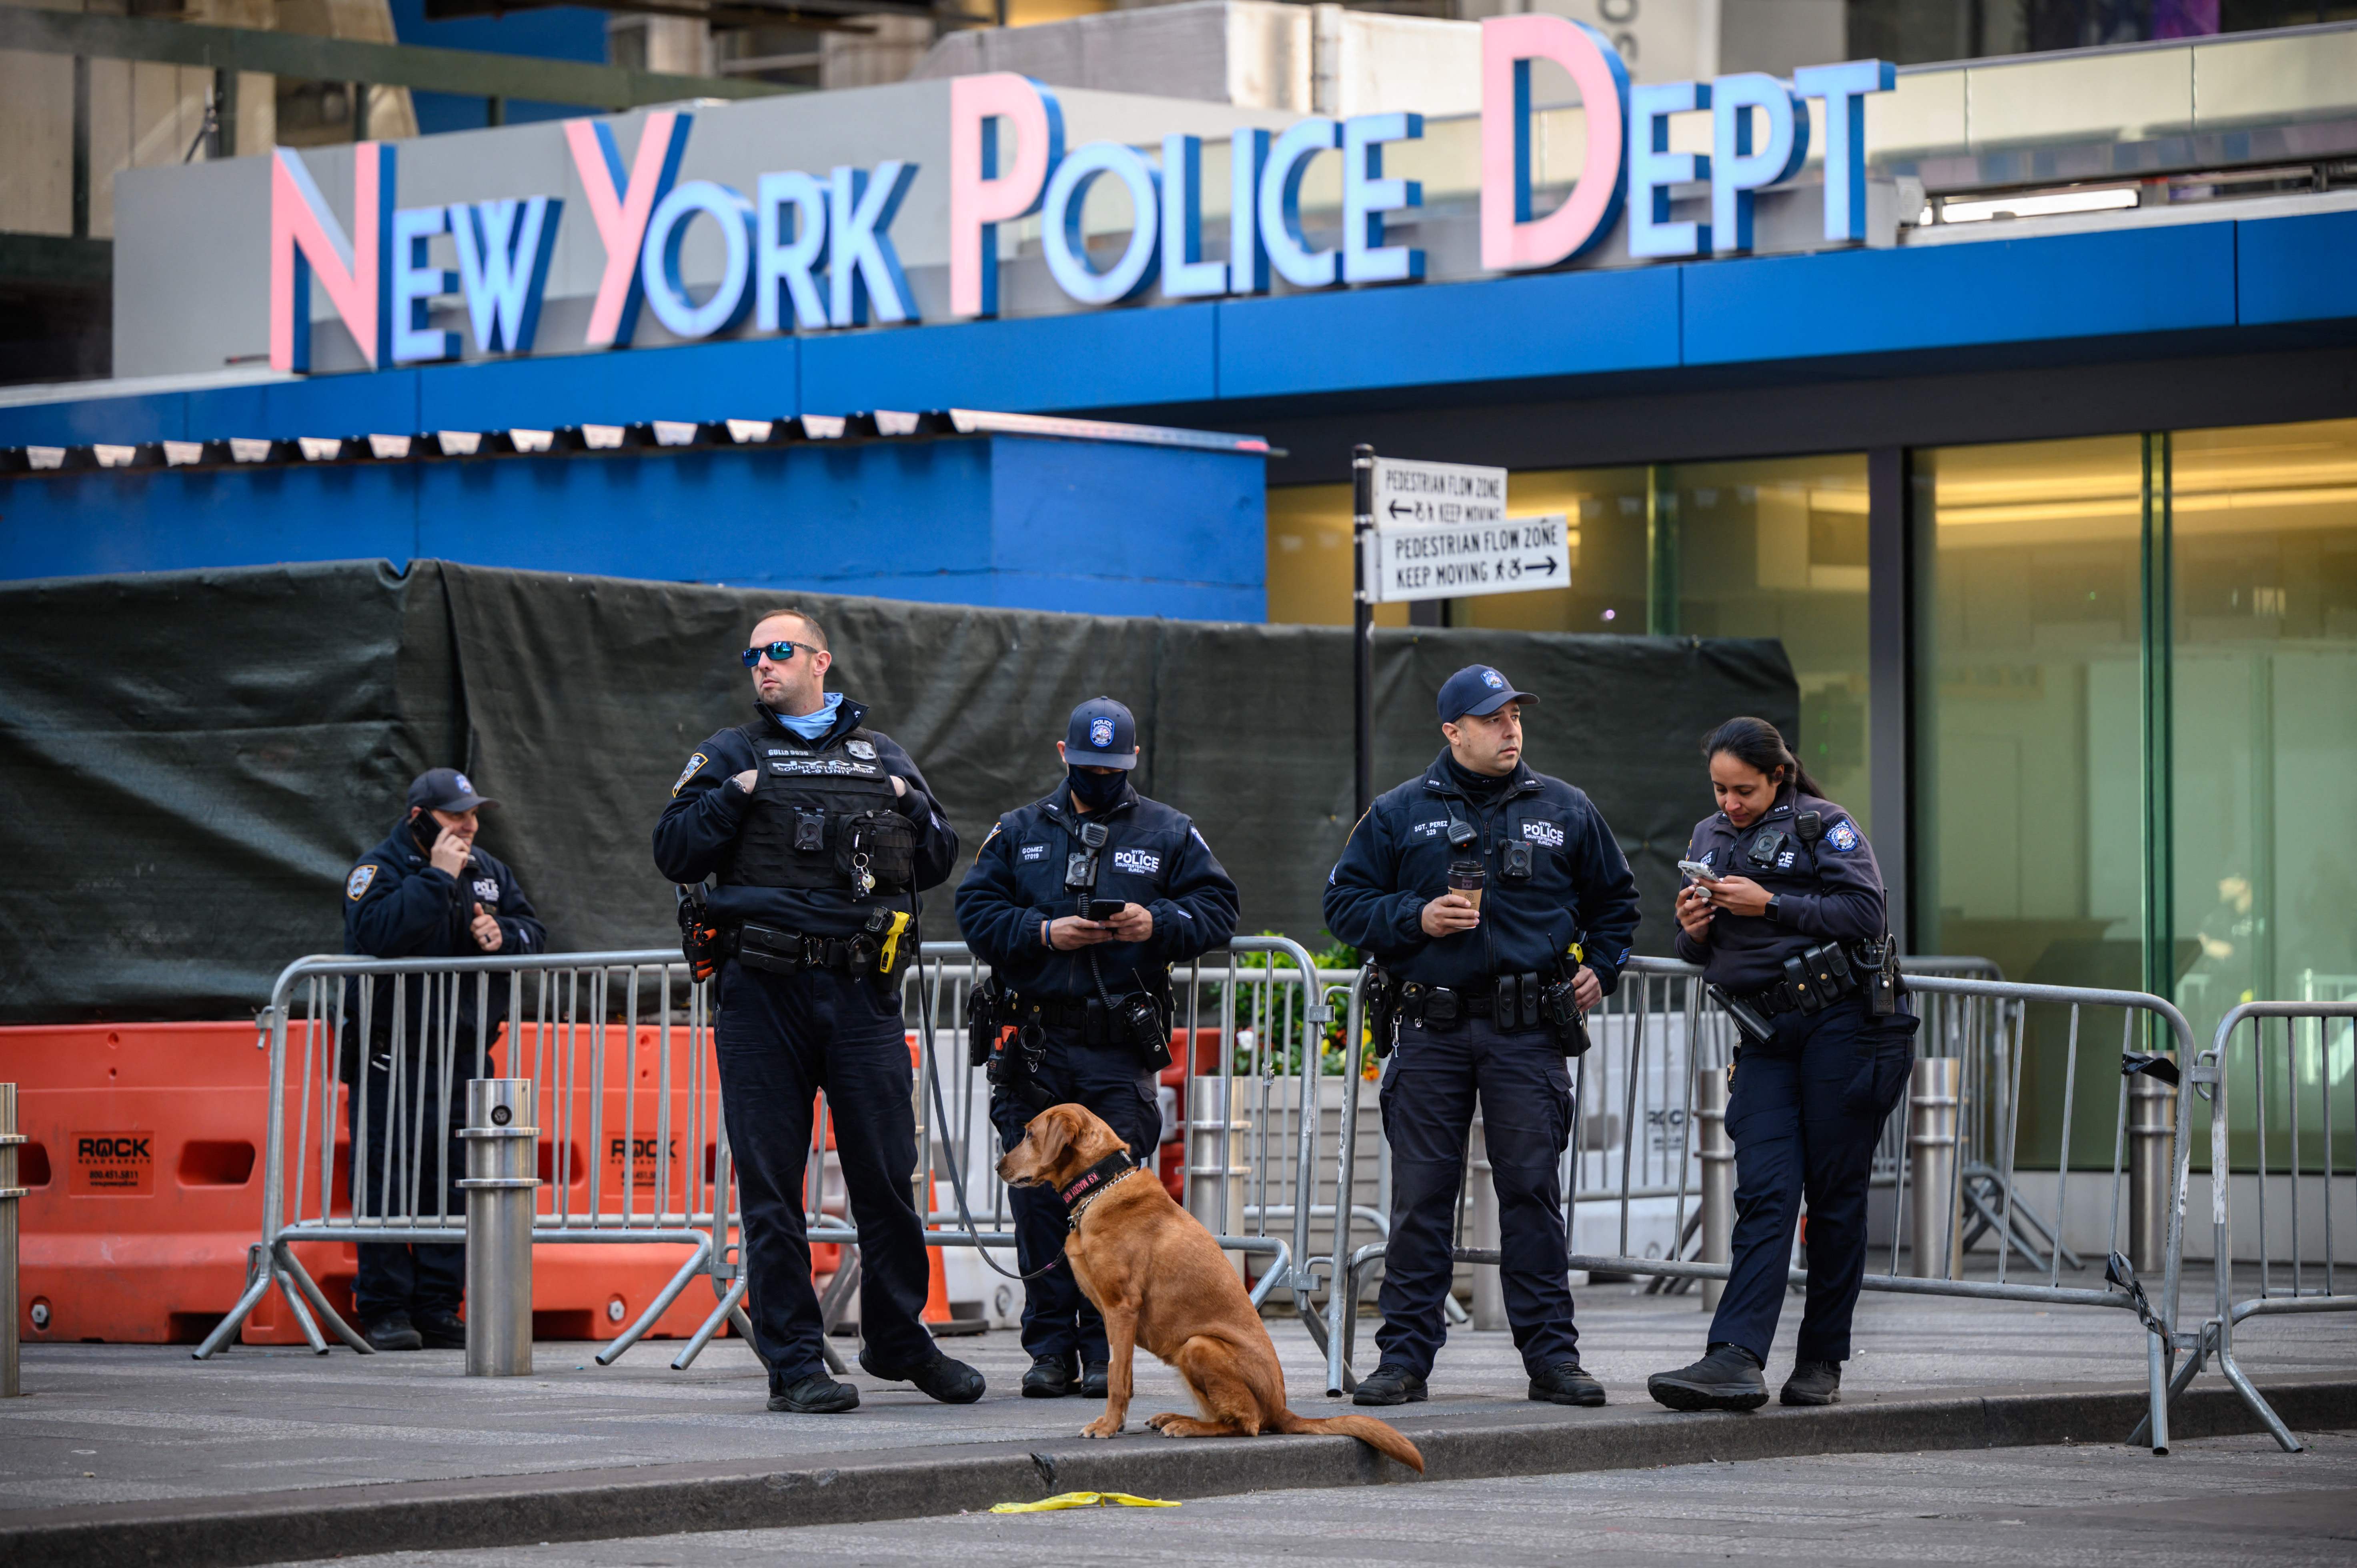 Police officers standing outside the Times Square police station.